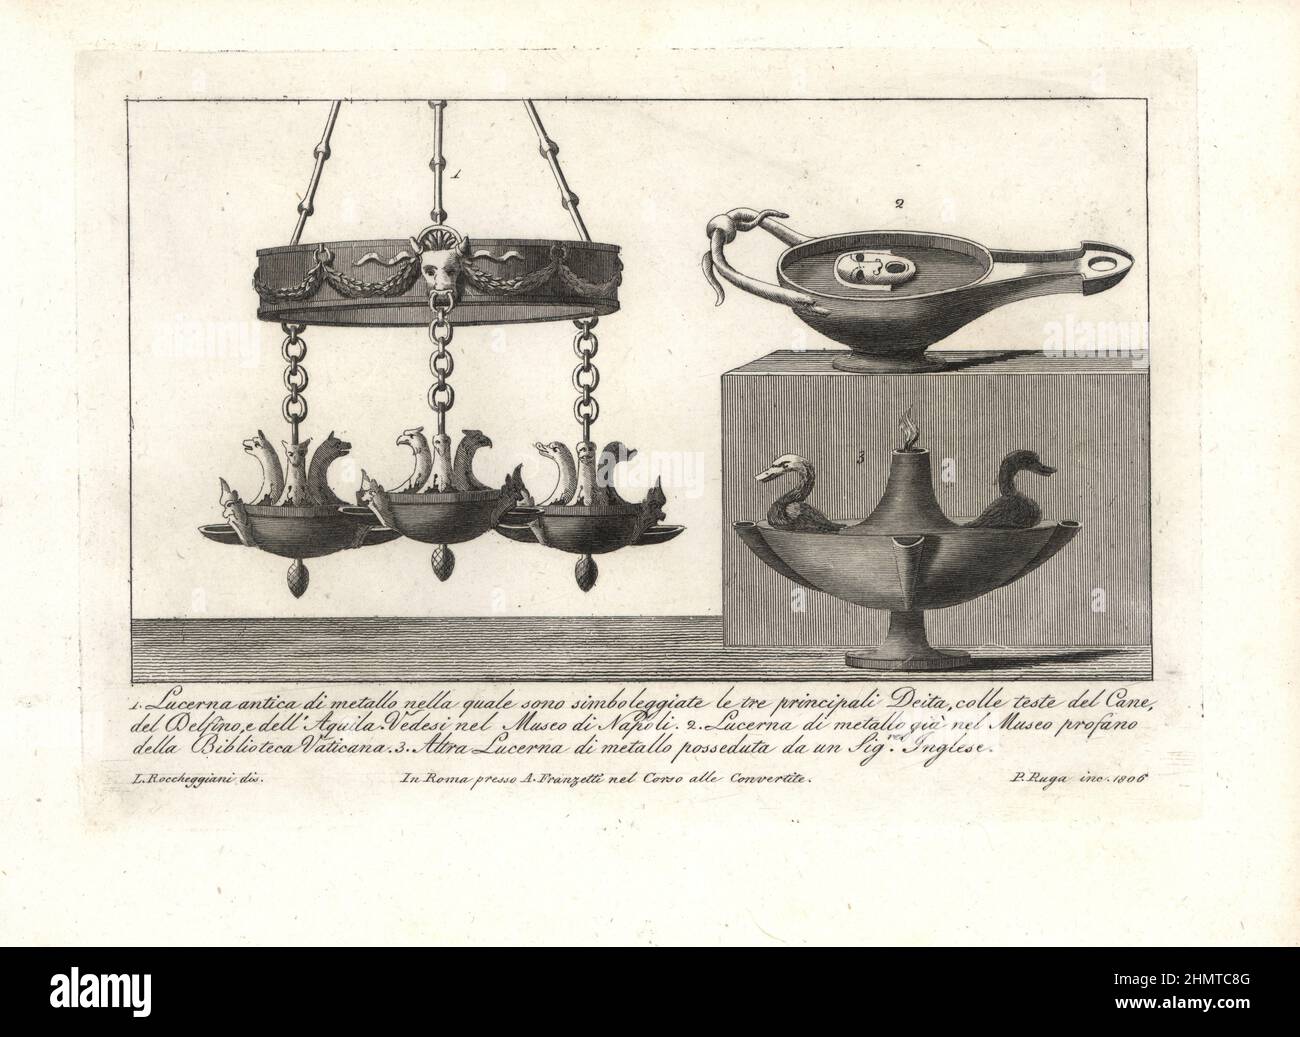 Ancient metal lamp with heads of dogs, dolphins and eagles symbolizing the three main deities in Naples Museum 1, metal oil lamp with theatrical mask in the Museo Profano, Vatican Library 2, and another metal lamp with swan heads 3. Copperplate engraving by Pietro Ruga after an illustration by Lorenzo Rocceggiani from his own 100 Plates of Costumes Religious, Civil and Military of the Ancient Egyptians, Etruscans, Greeks and Romans, Franzetti, Rome, 1802. Stock Photo